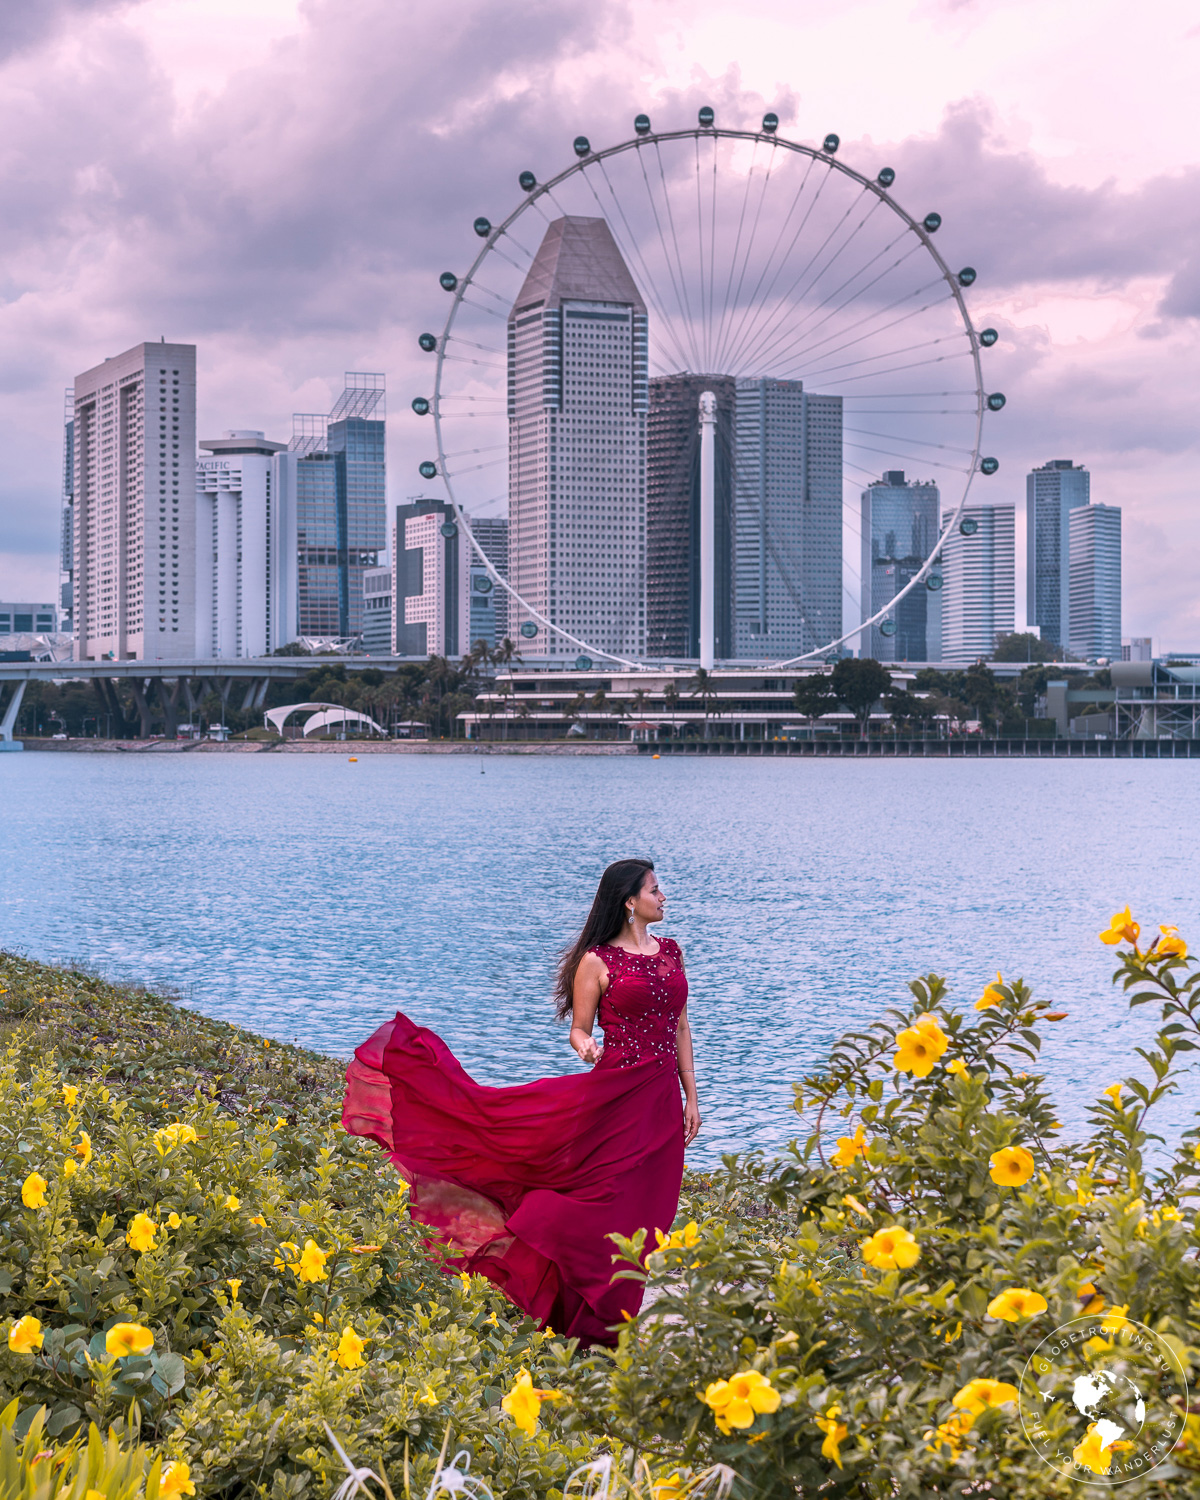 Gardens-by-the-bay-Singapore-Flyer